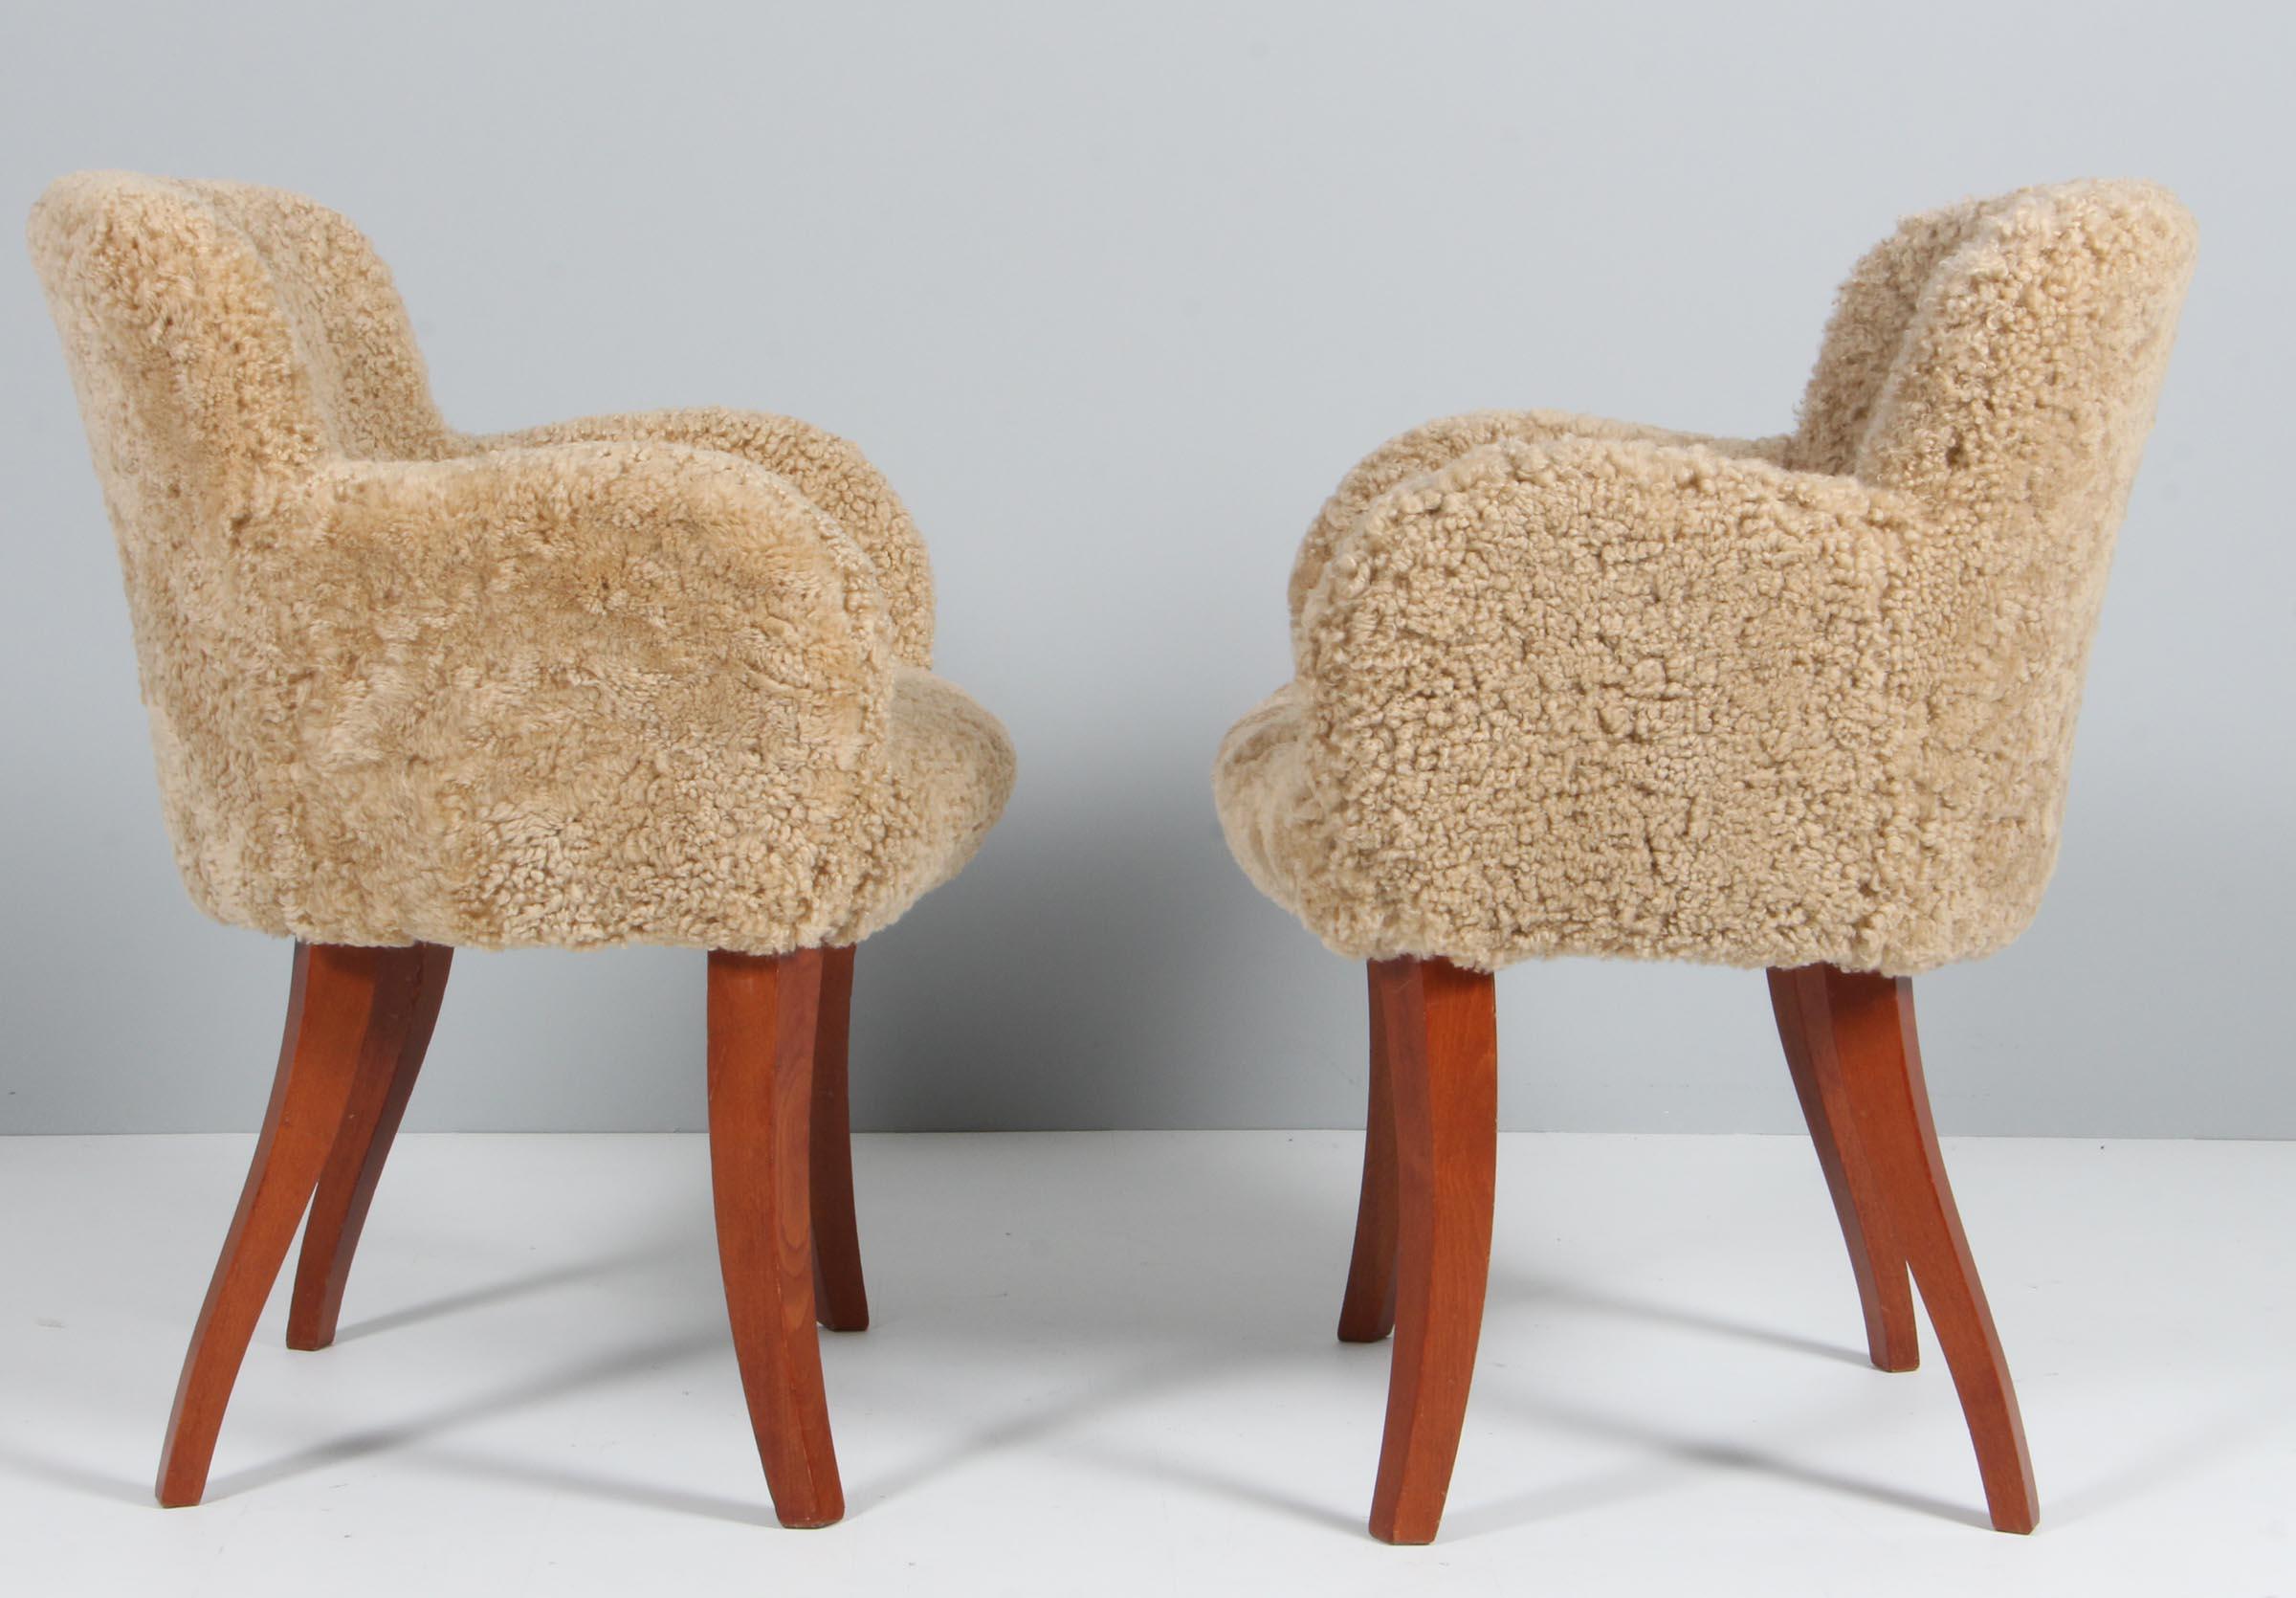 Sheepskin Pair of 1940s Chairs in Lambskind with Mahogany Legs, Denmark For Sale